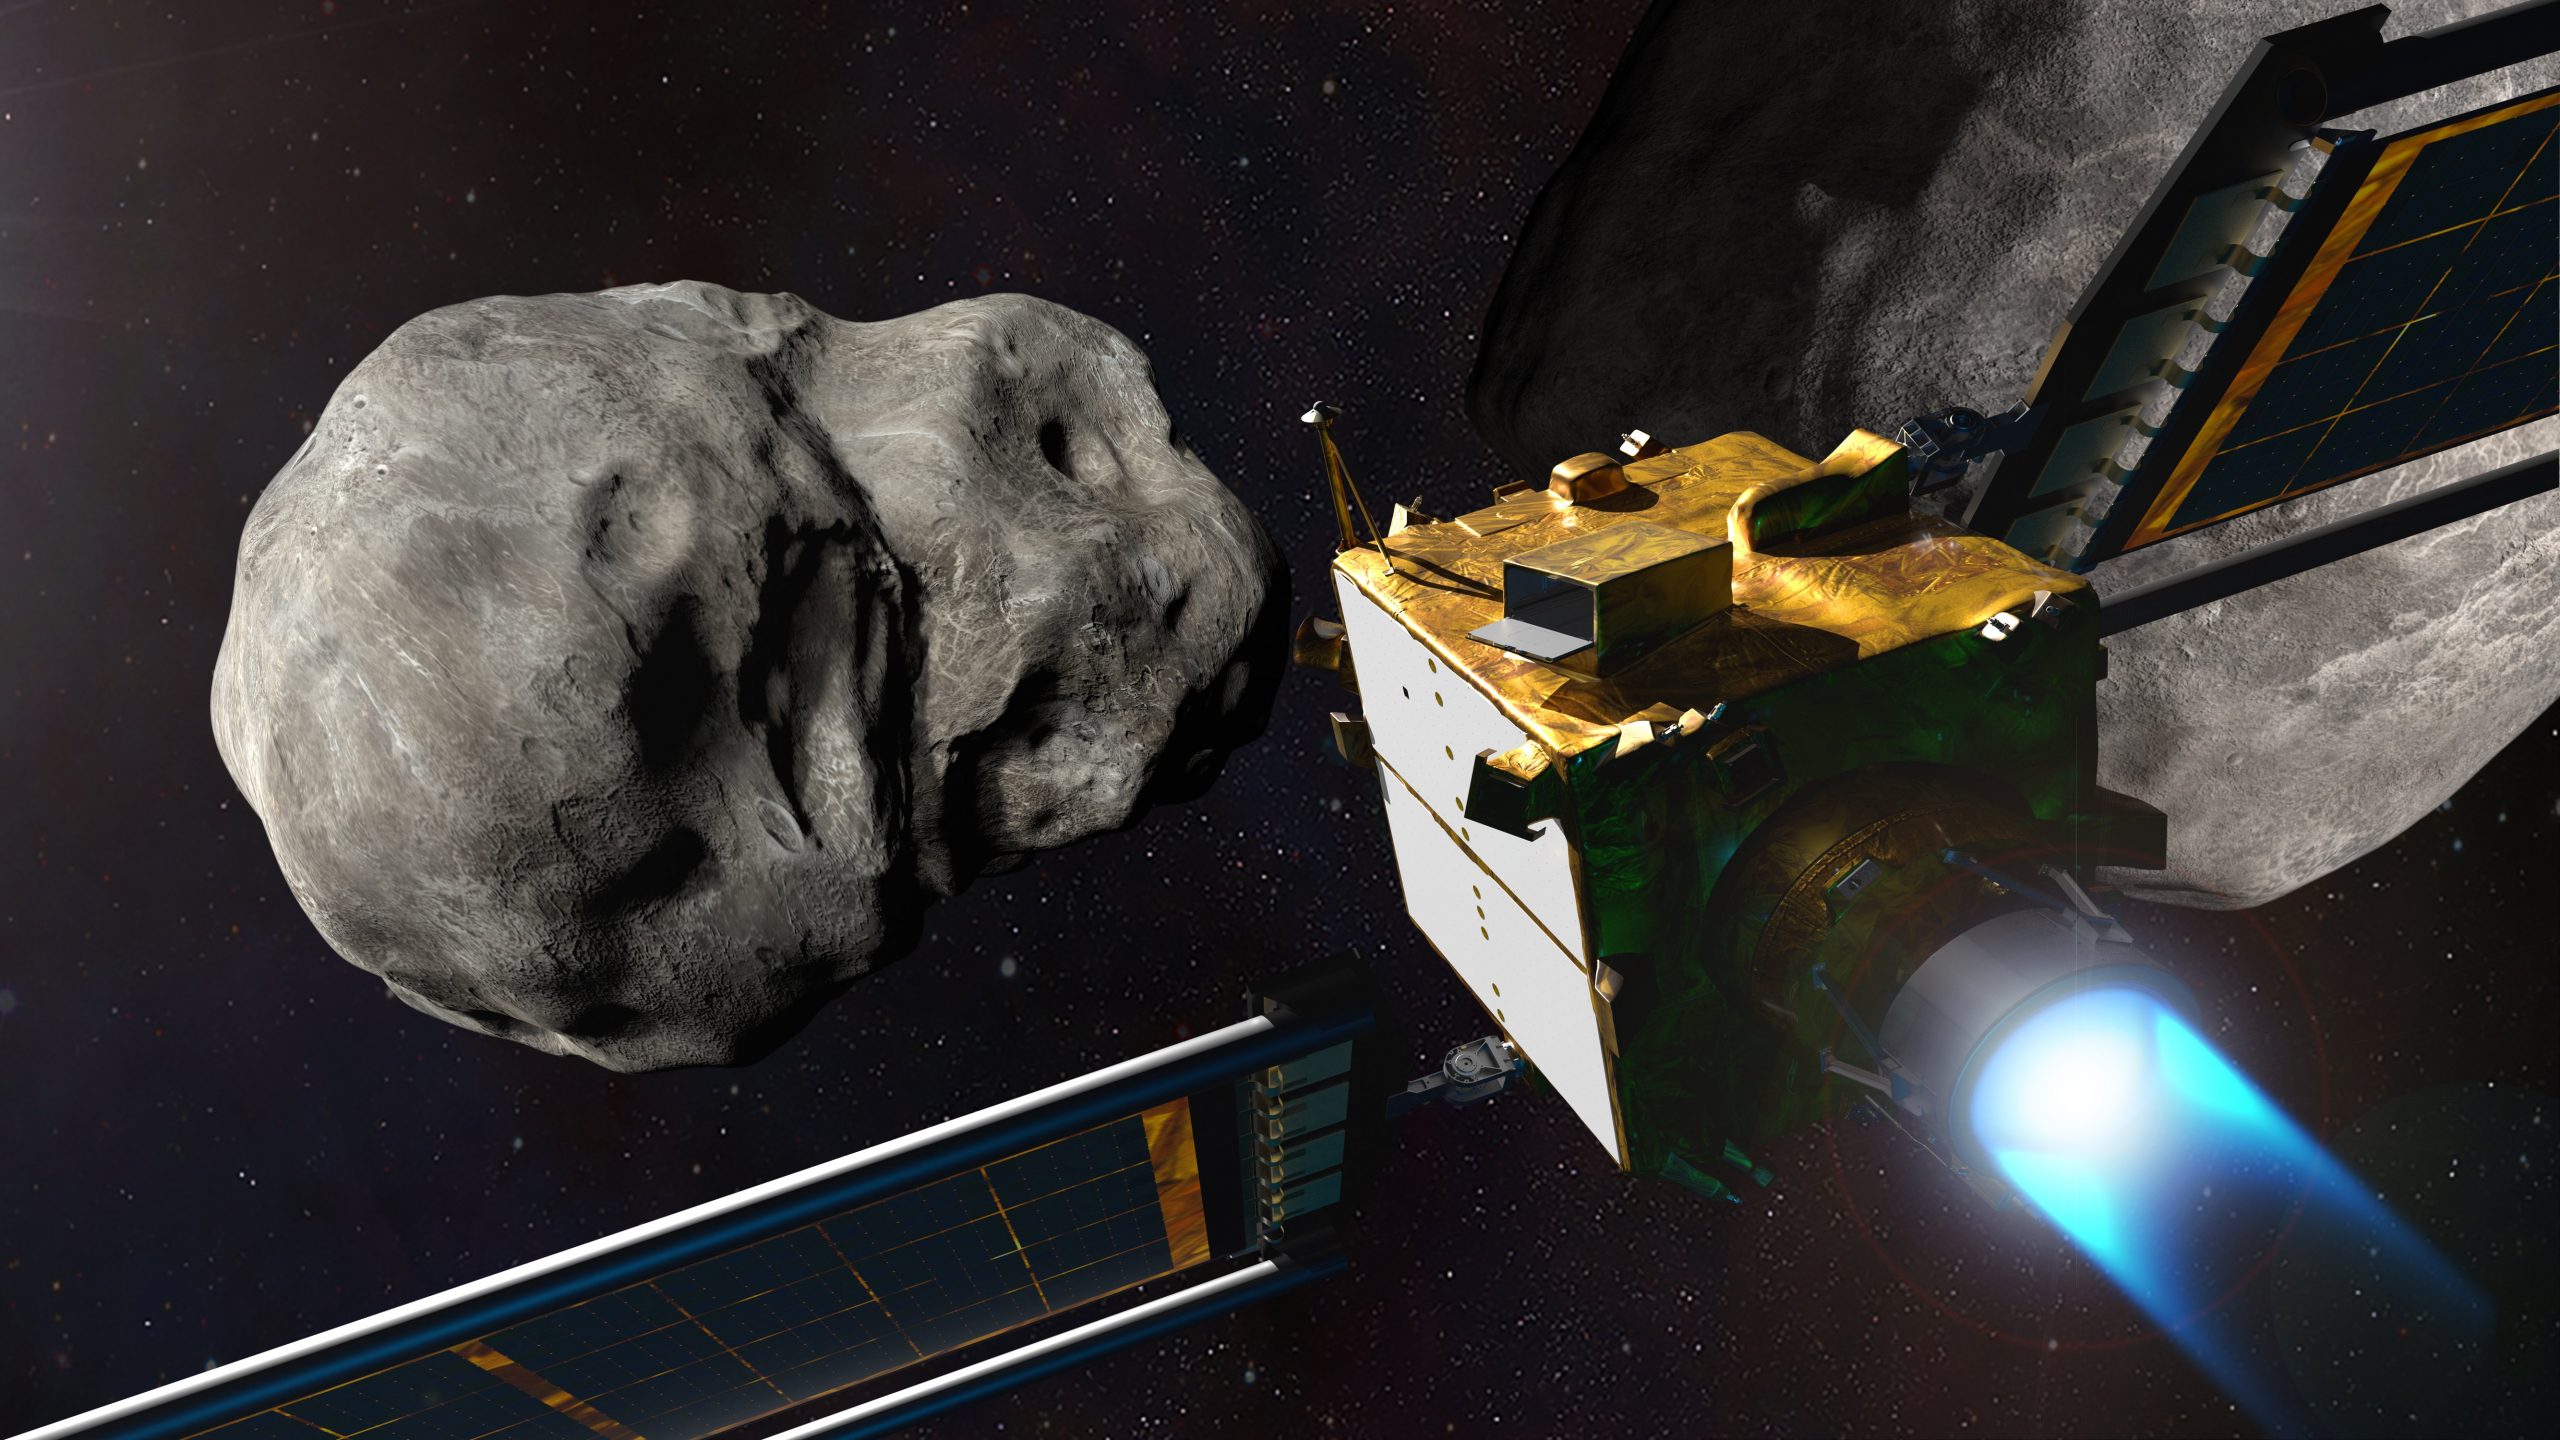 What we’ll see when NASA crashes into an asteroid on purpose